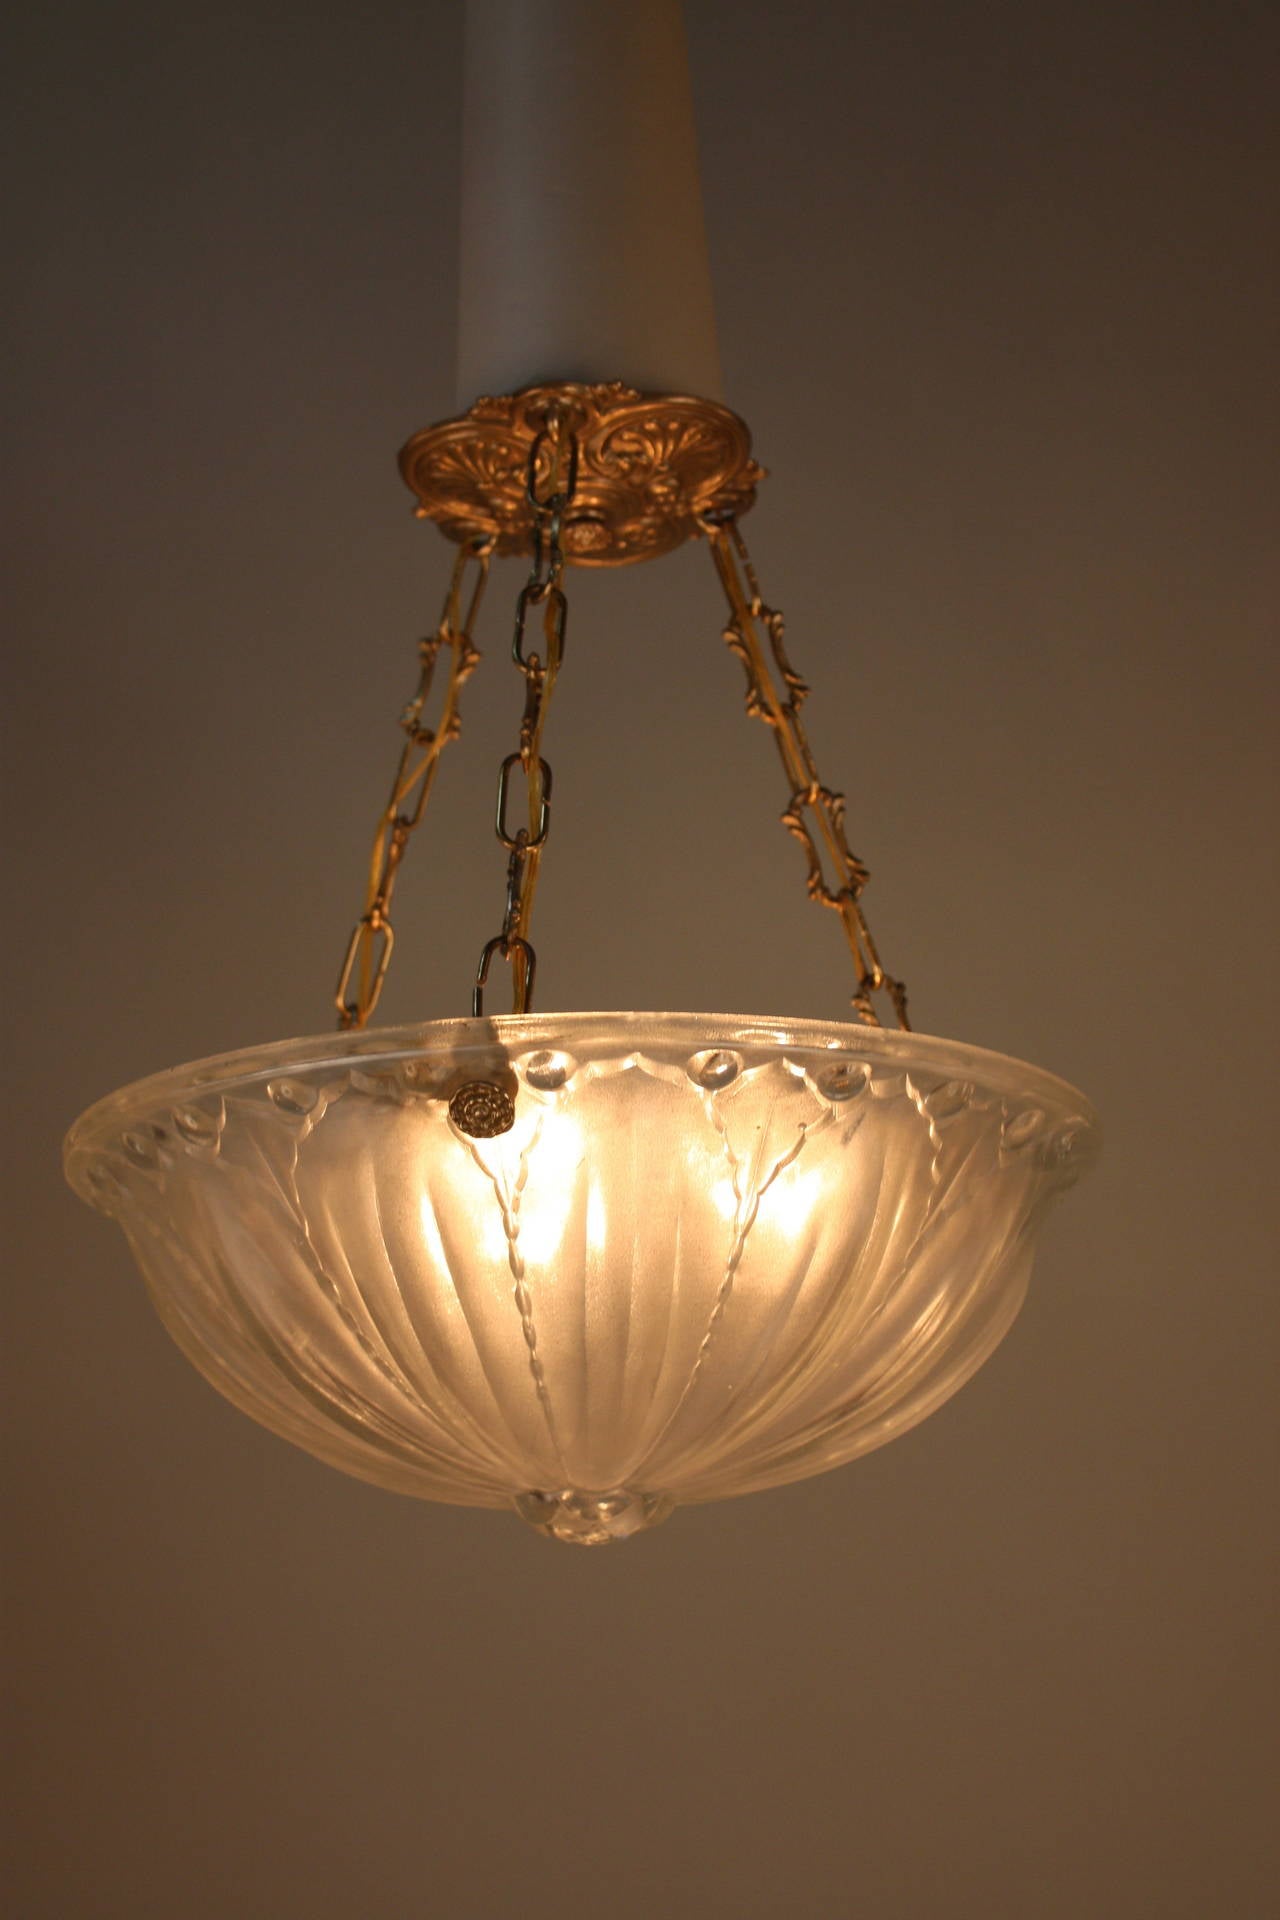 A beautiful French Art Deco pendant light. Made of glass with nickel on bronze chain and canopy.